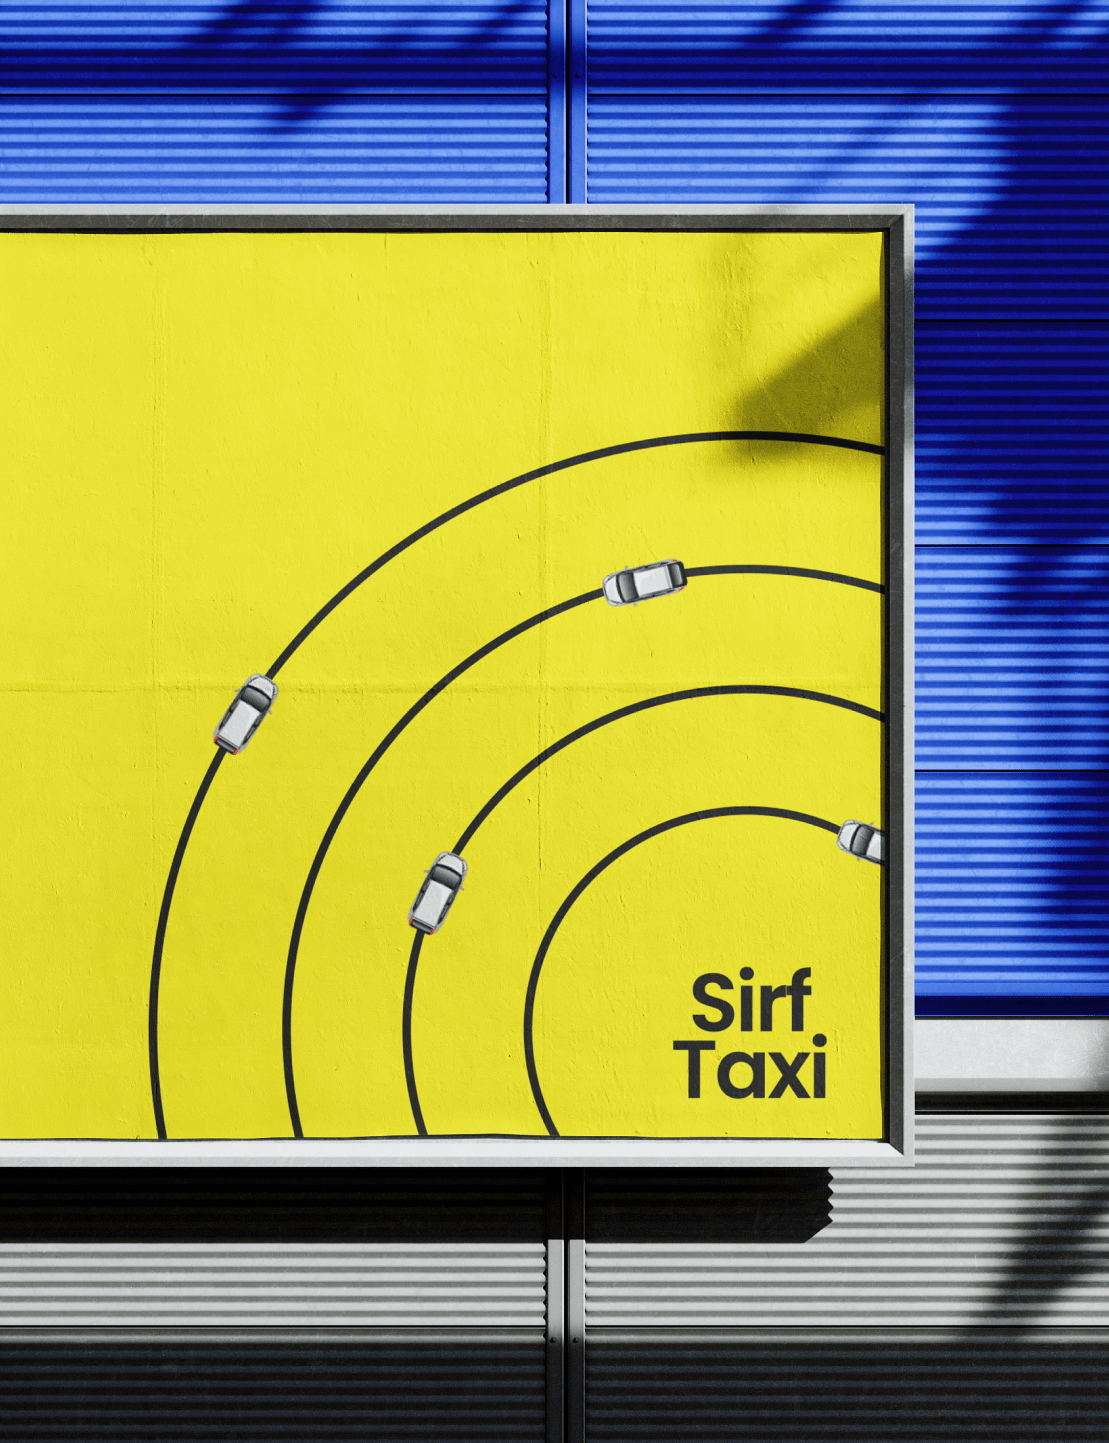 Wings transportation branding image for Sirf Taxi based out of India